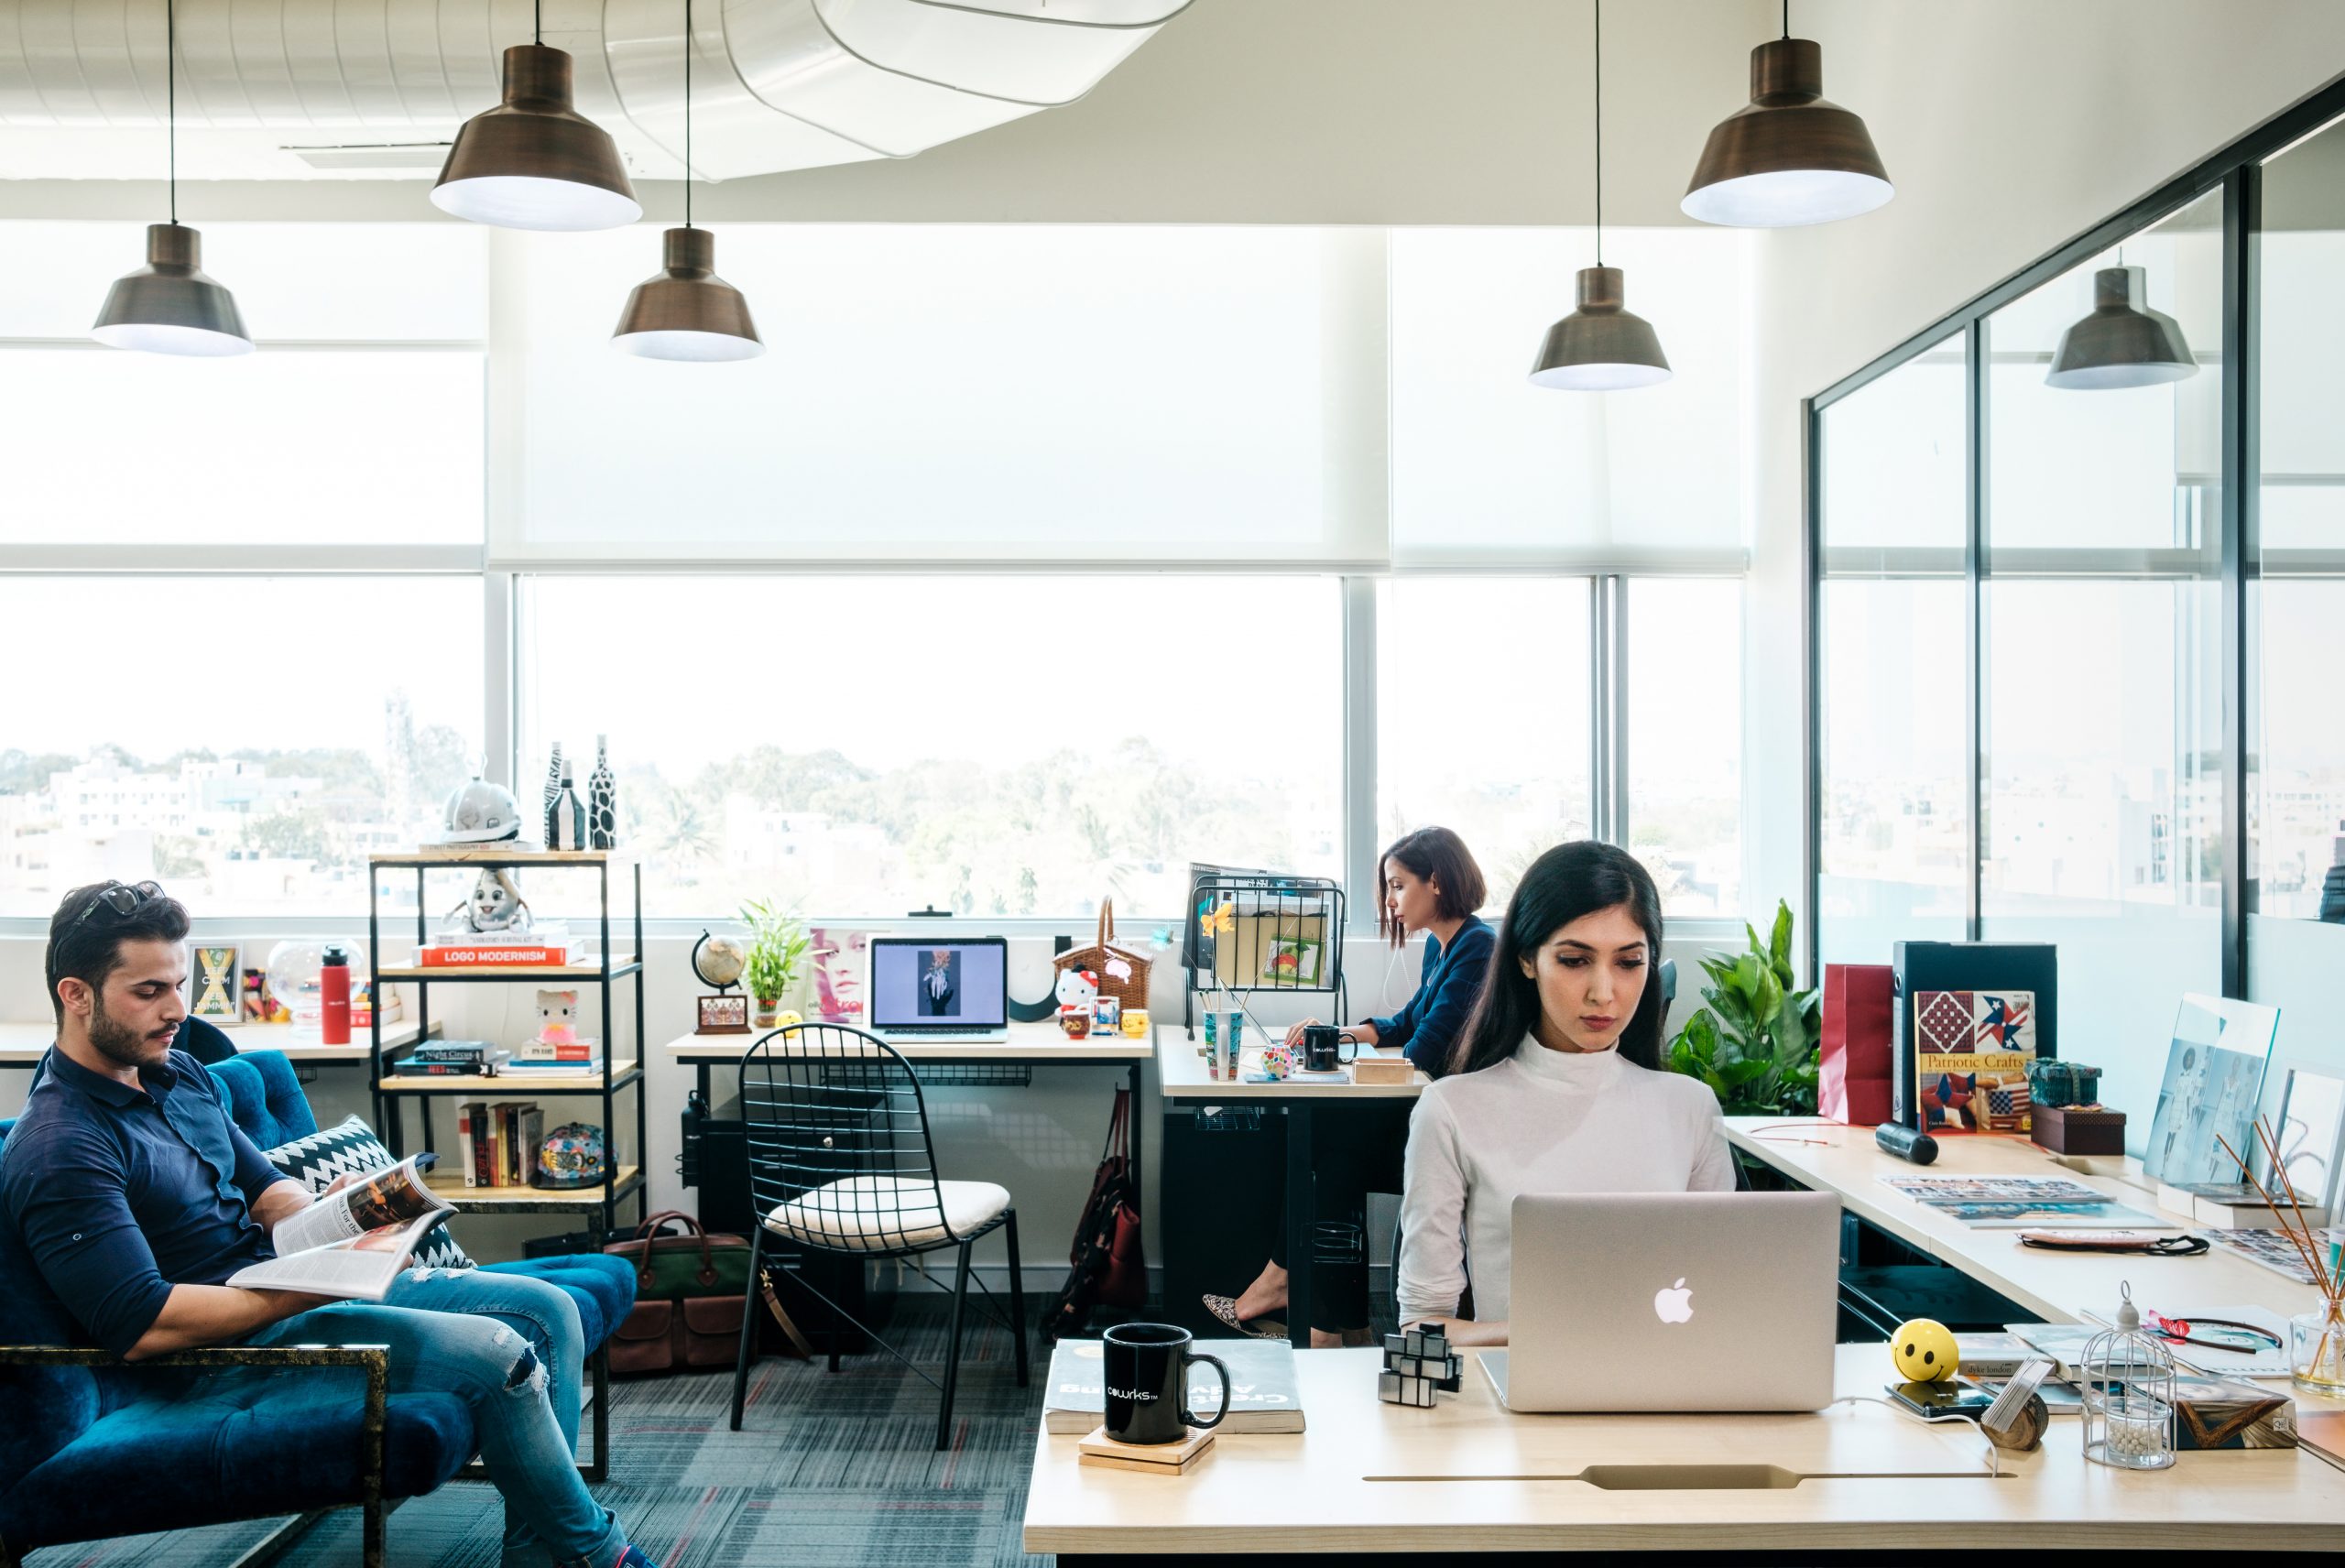 7 Things to Consider While Looking for a New Office Space | COWRKS Blog